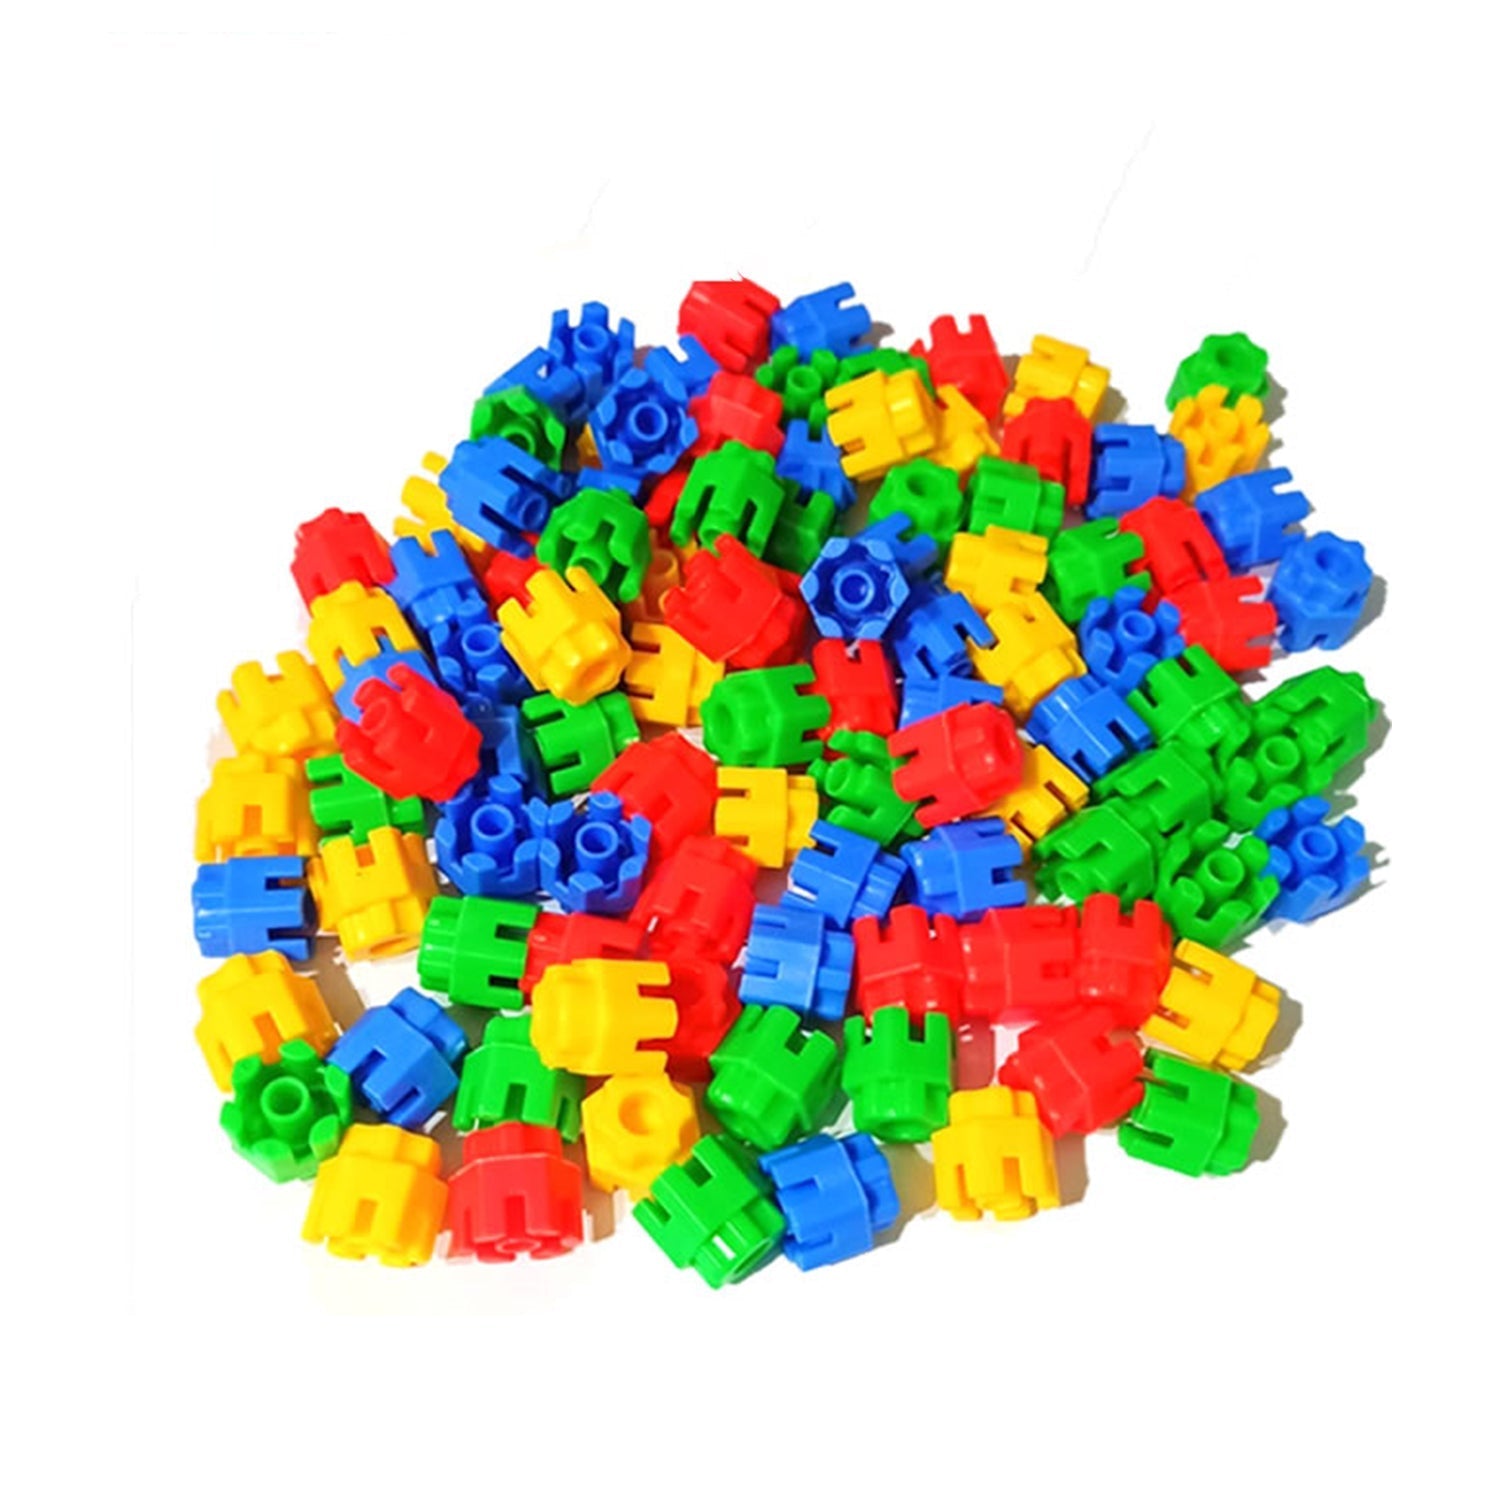 3908 120 Pc Hexa Blocks Toy used in all kinds of household and official places specially for kids and children for their playing and enjoying purposes. DeoDap